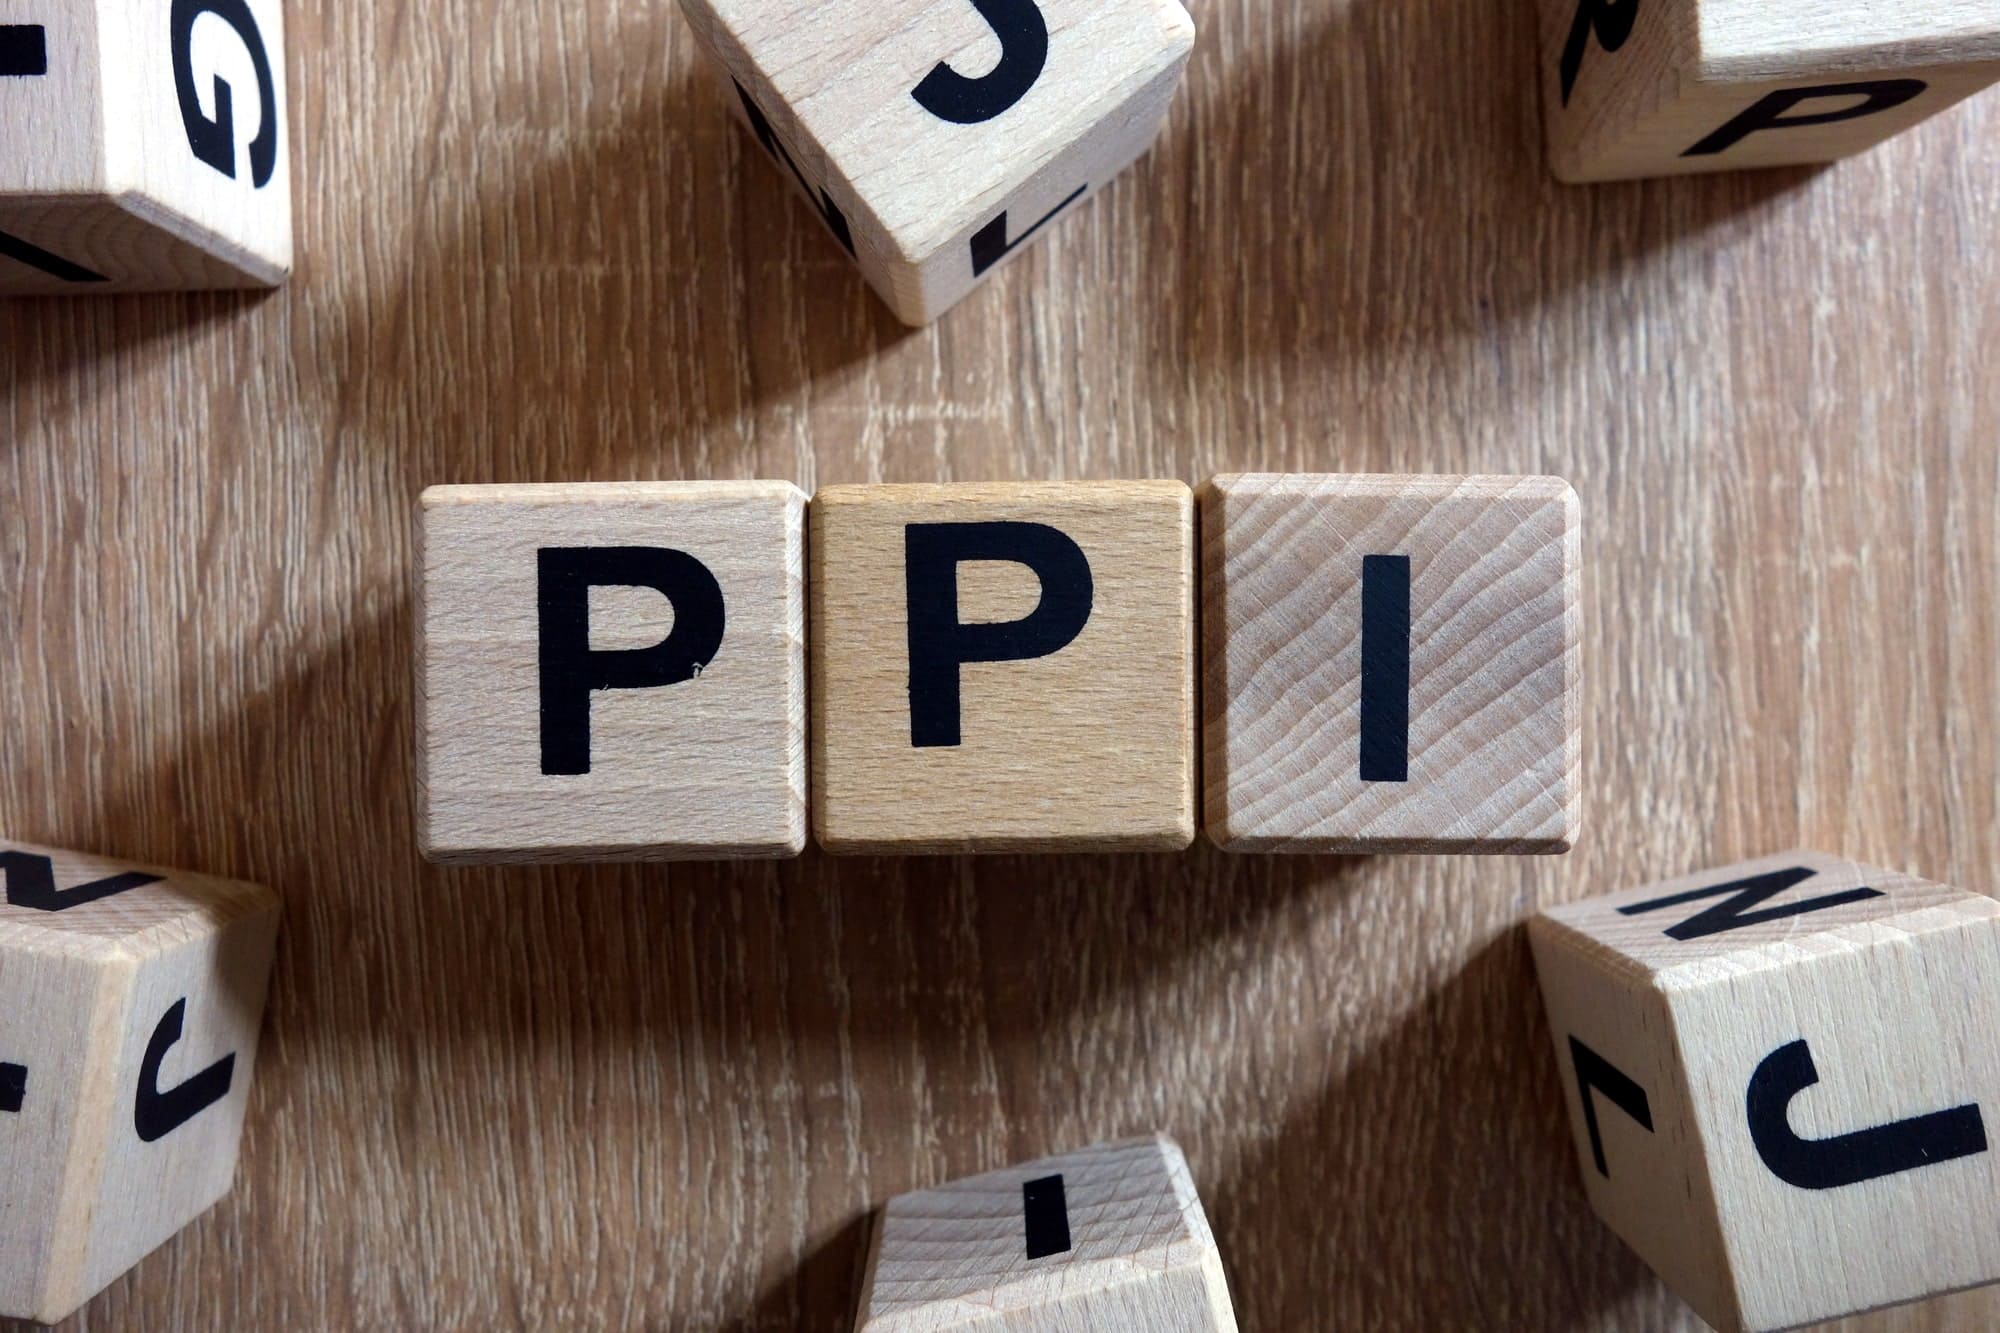 The Ultimate Guide To Making A PPI Claim Before The Deadline